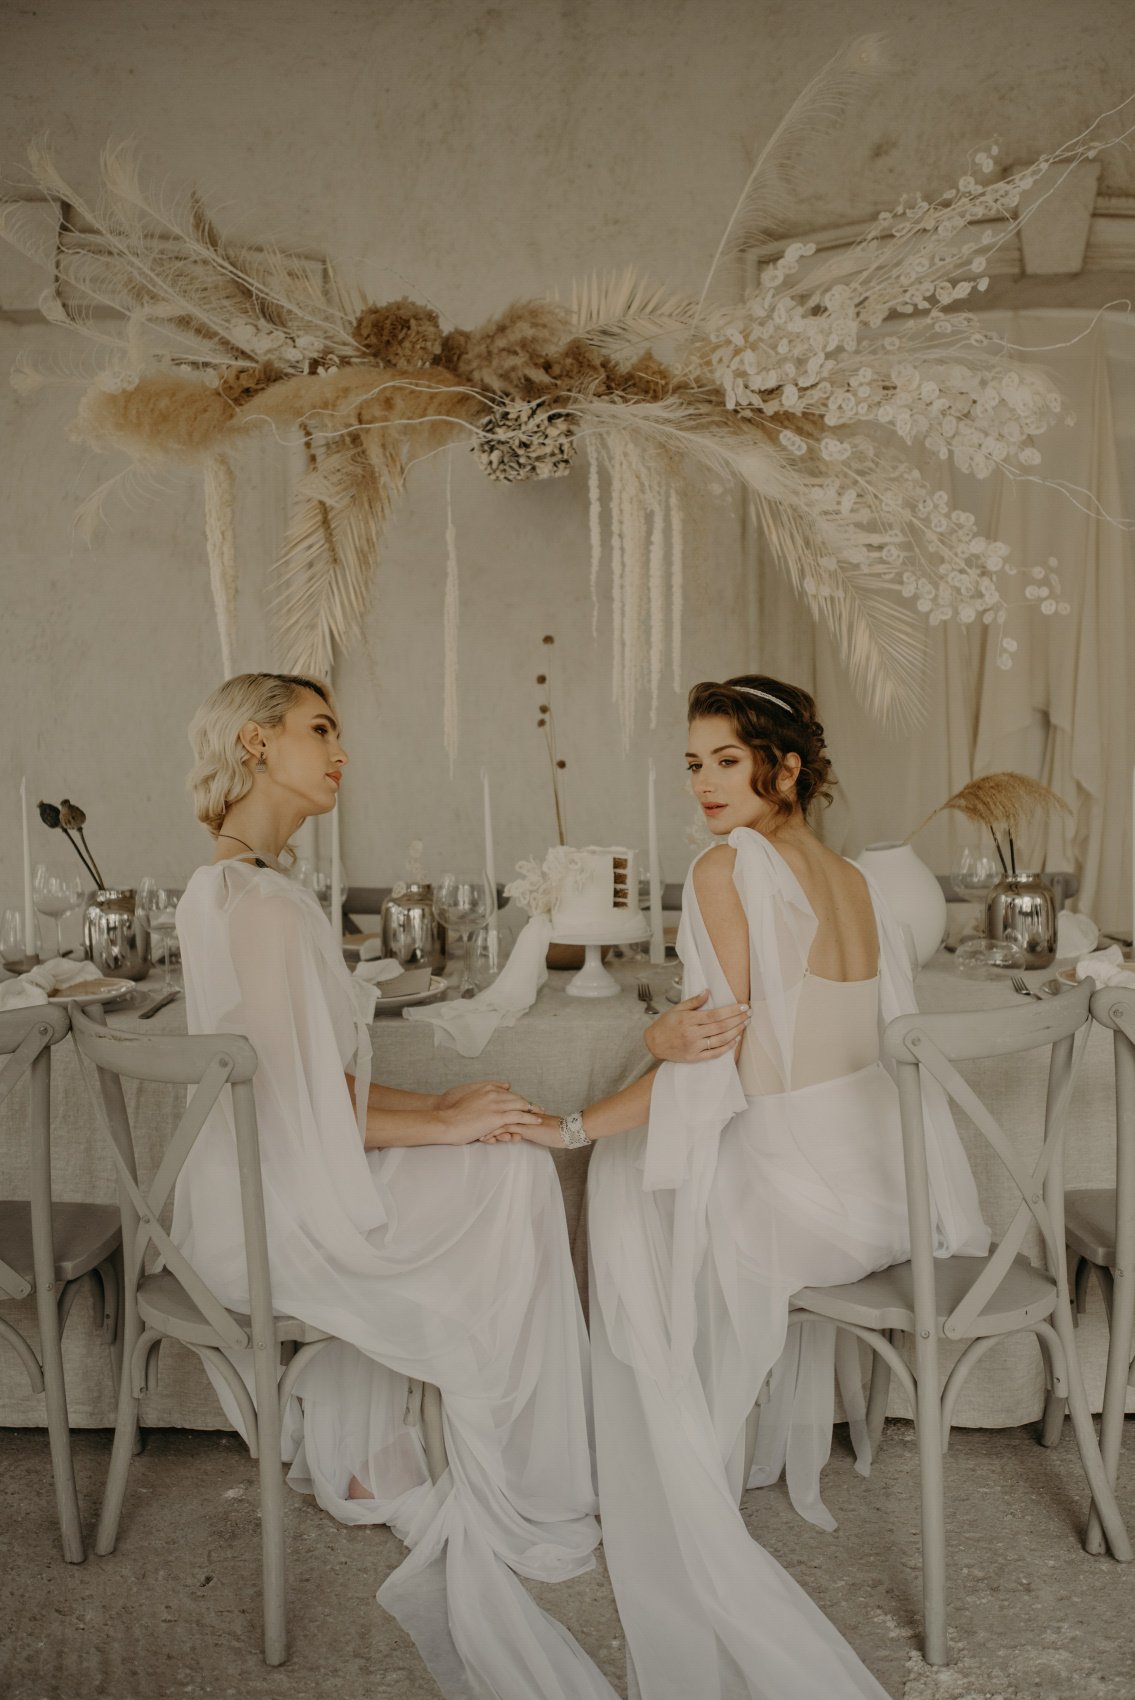 Two brides at the table